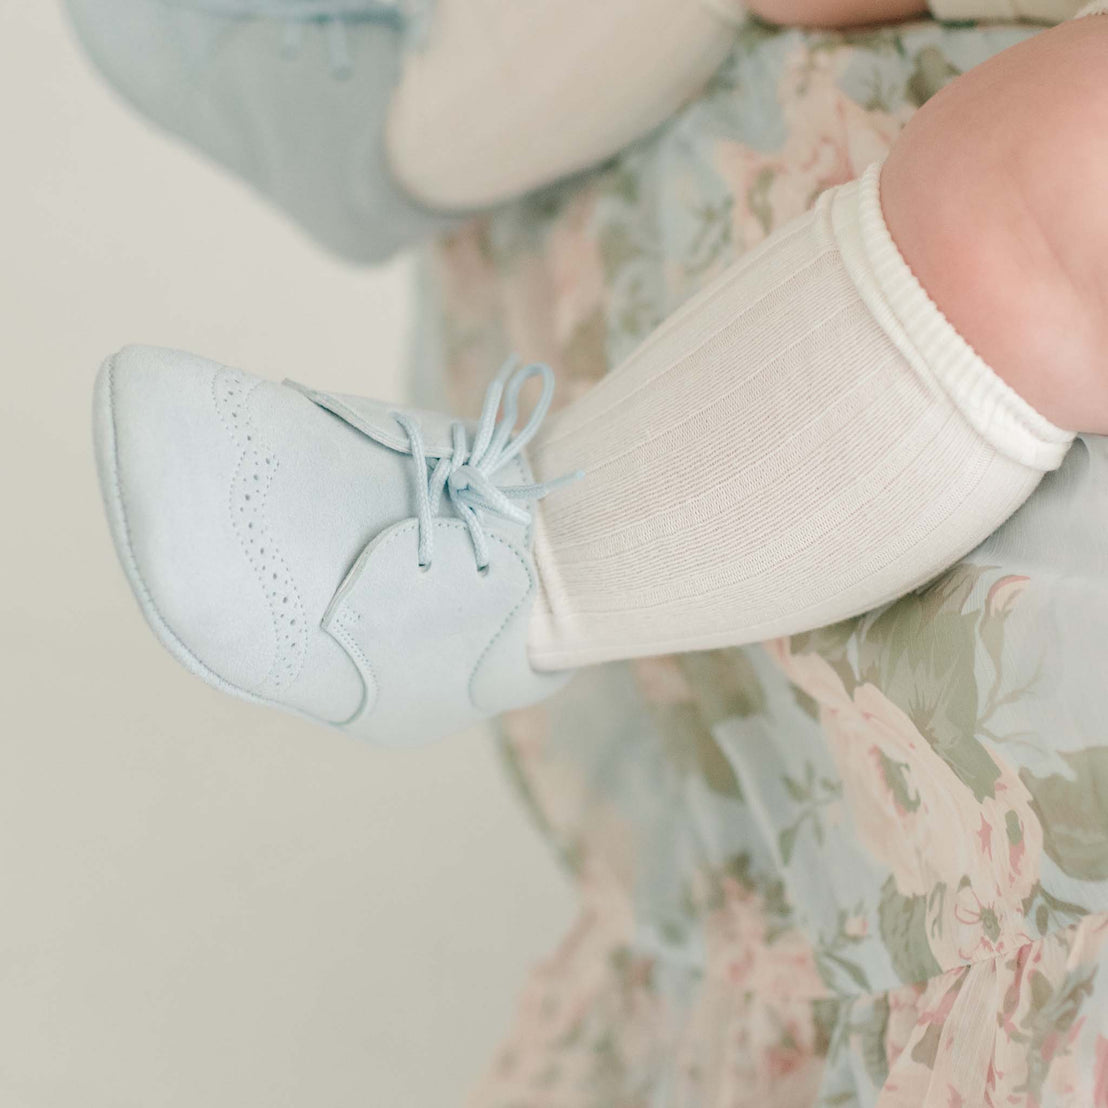 Baby wearing the sky blue Ezra Suede shoes